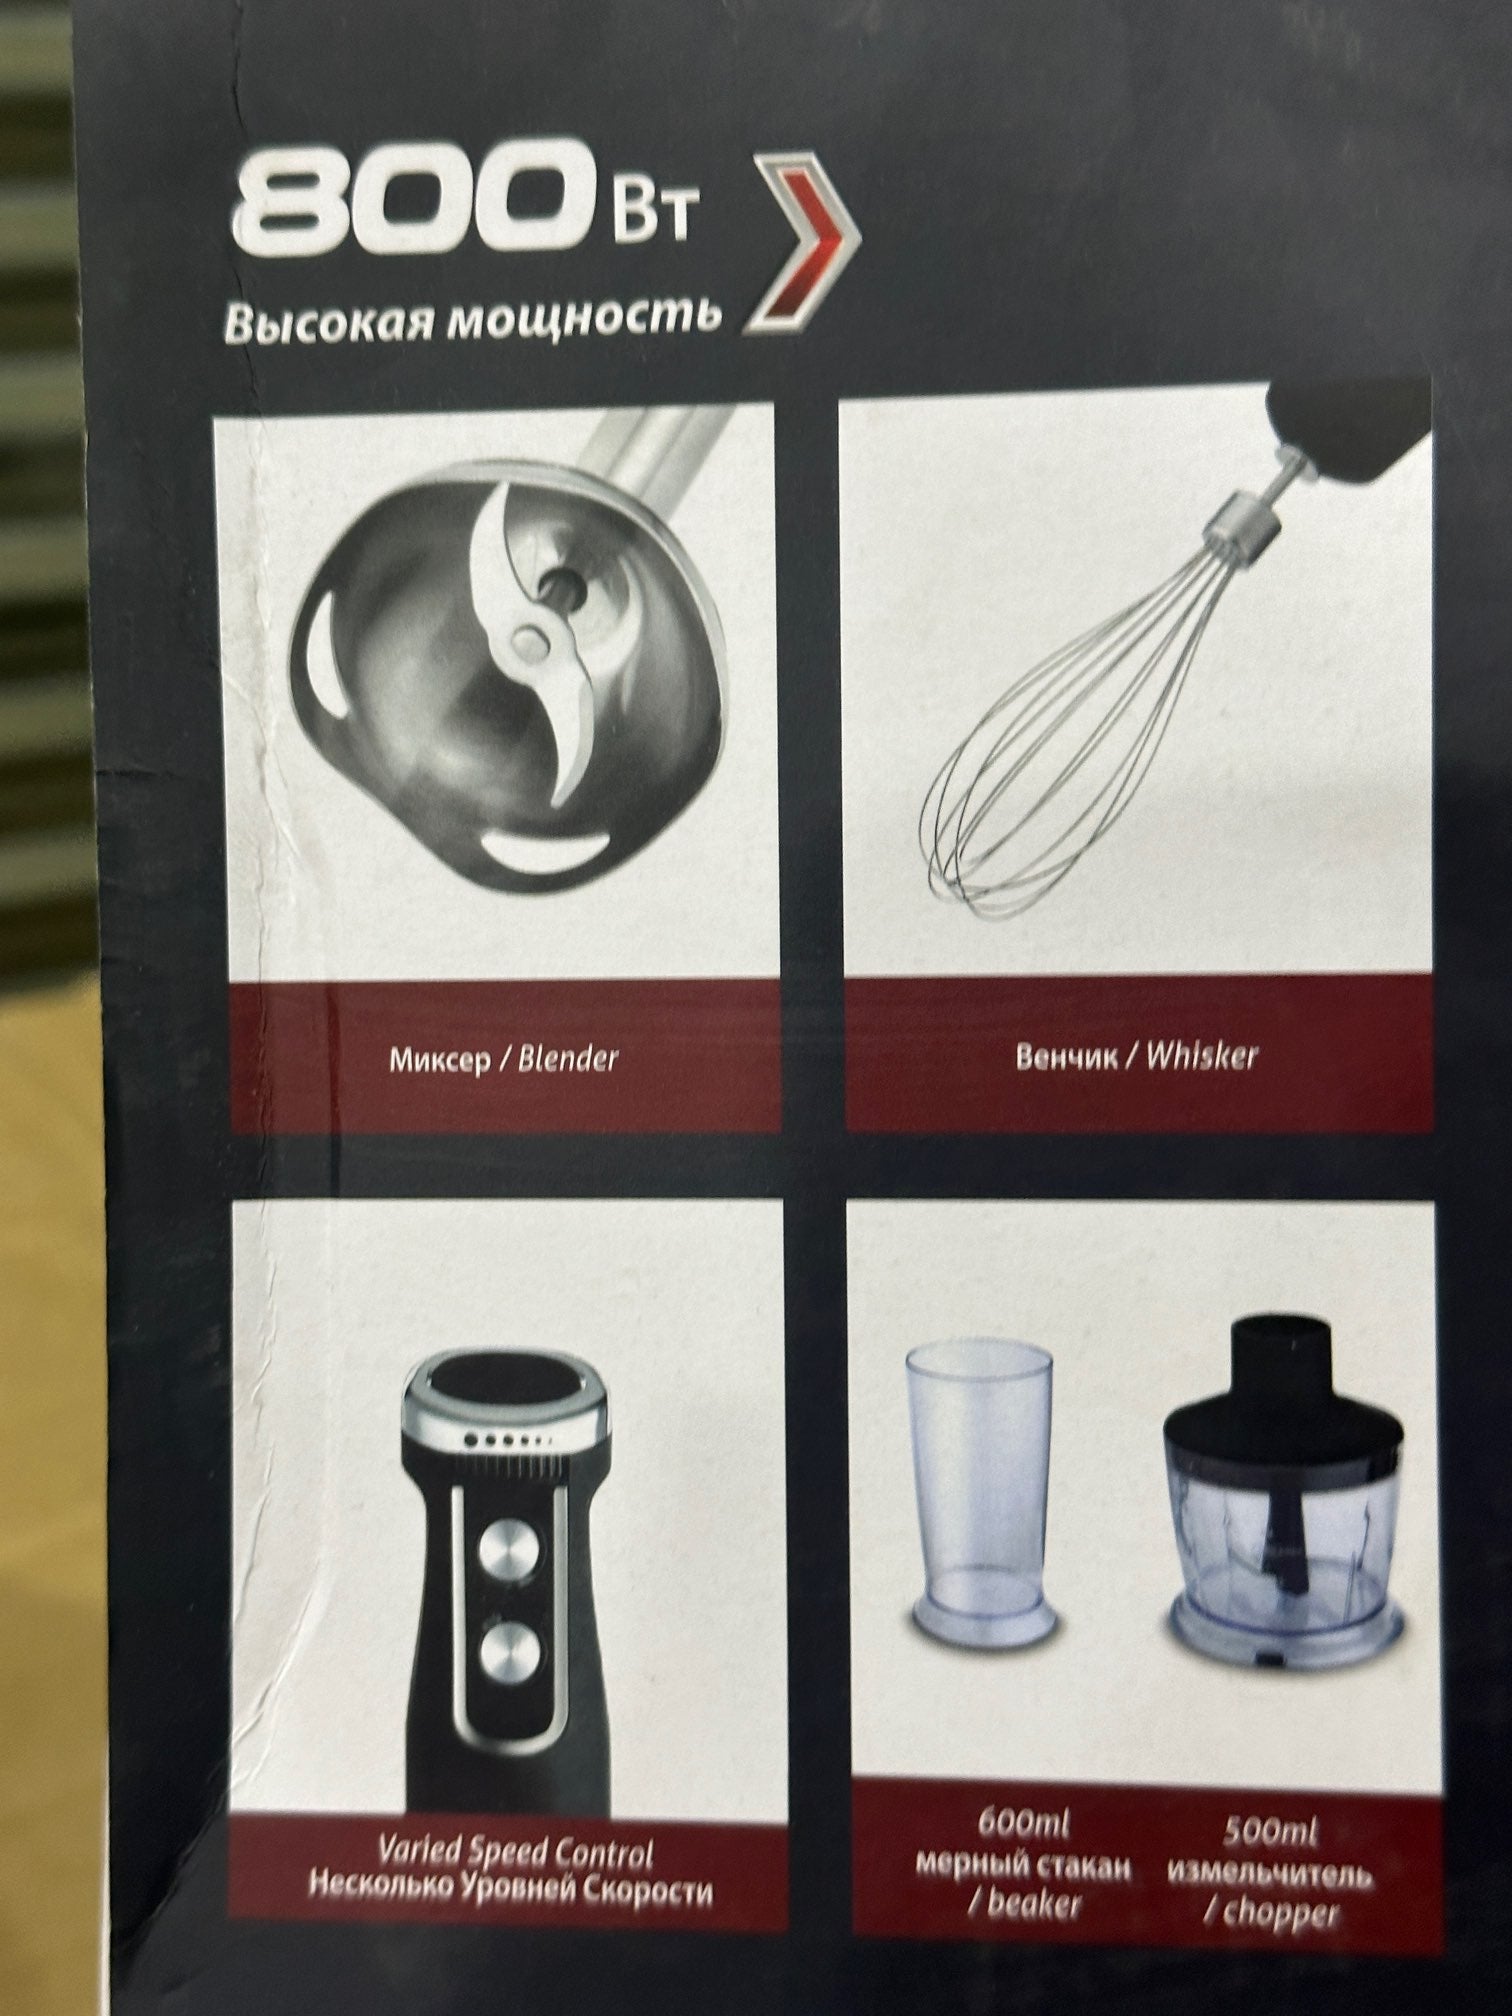 Russia Lot 5 in one hand blender set